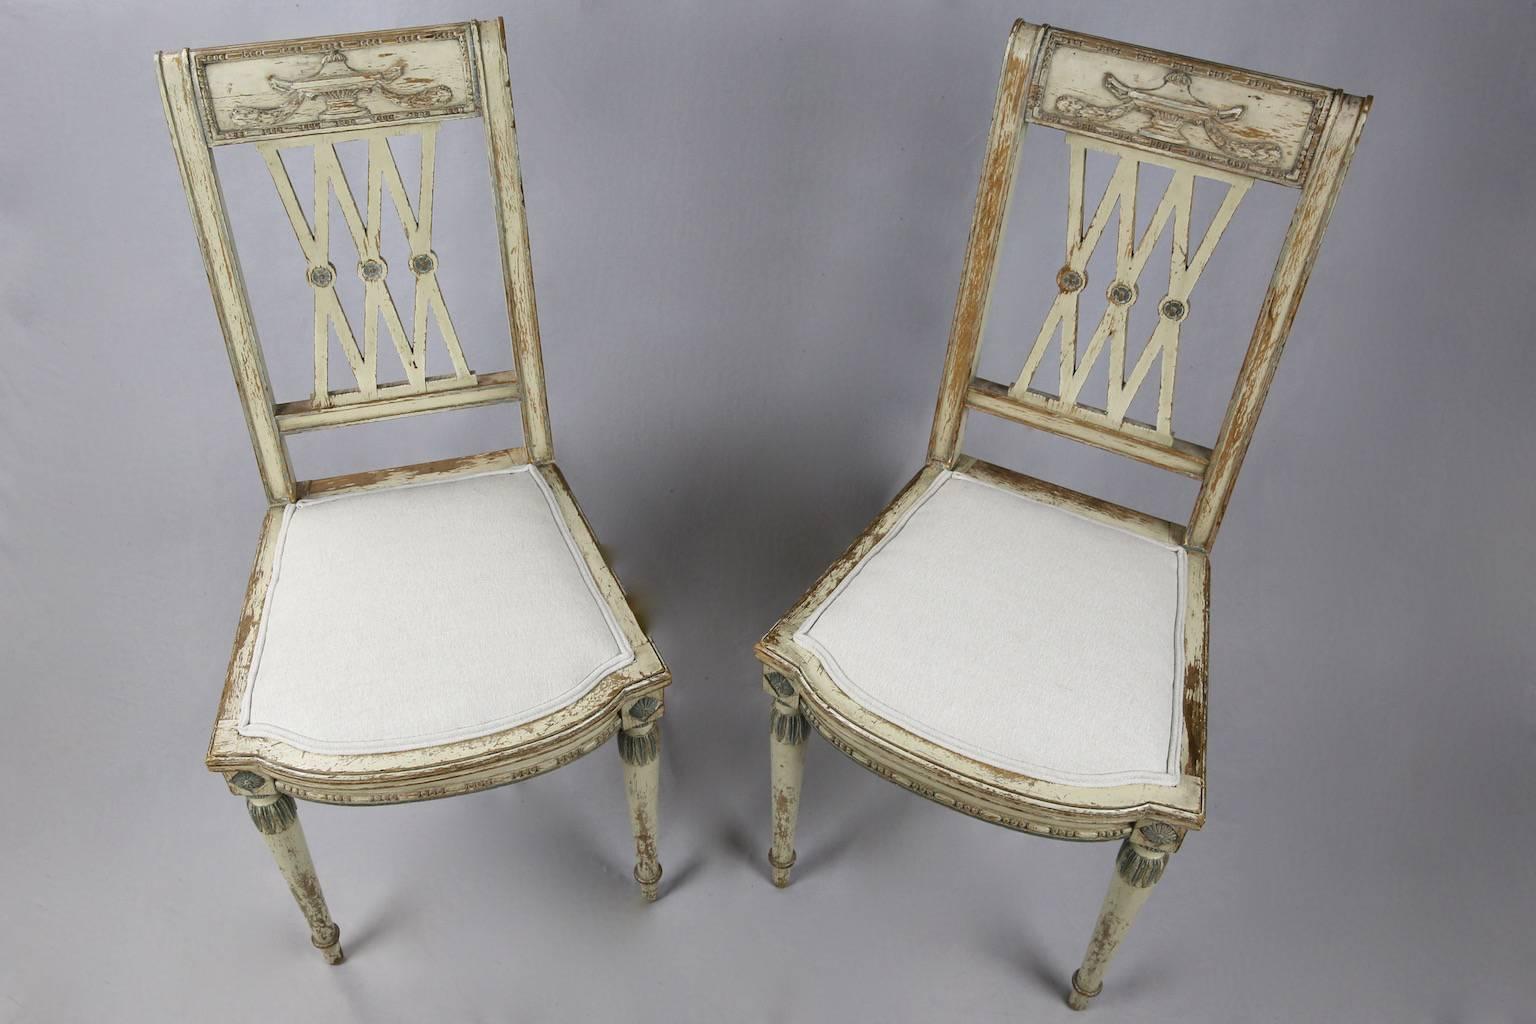 Empirical Evidence: Absolutely charming pair of French chairs in their original off-white and blue paintwork. Recently re-upholstered in a linen mix, each seat features an elegant lattice back embellished with roundels, back rail surmounted with a